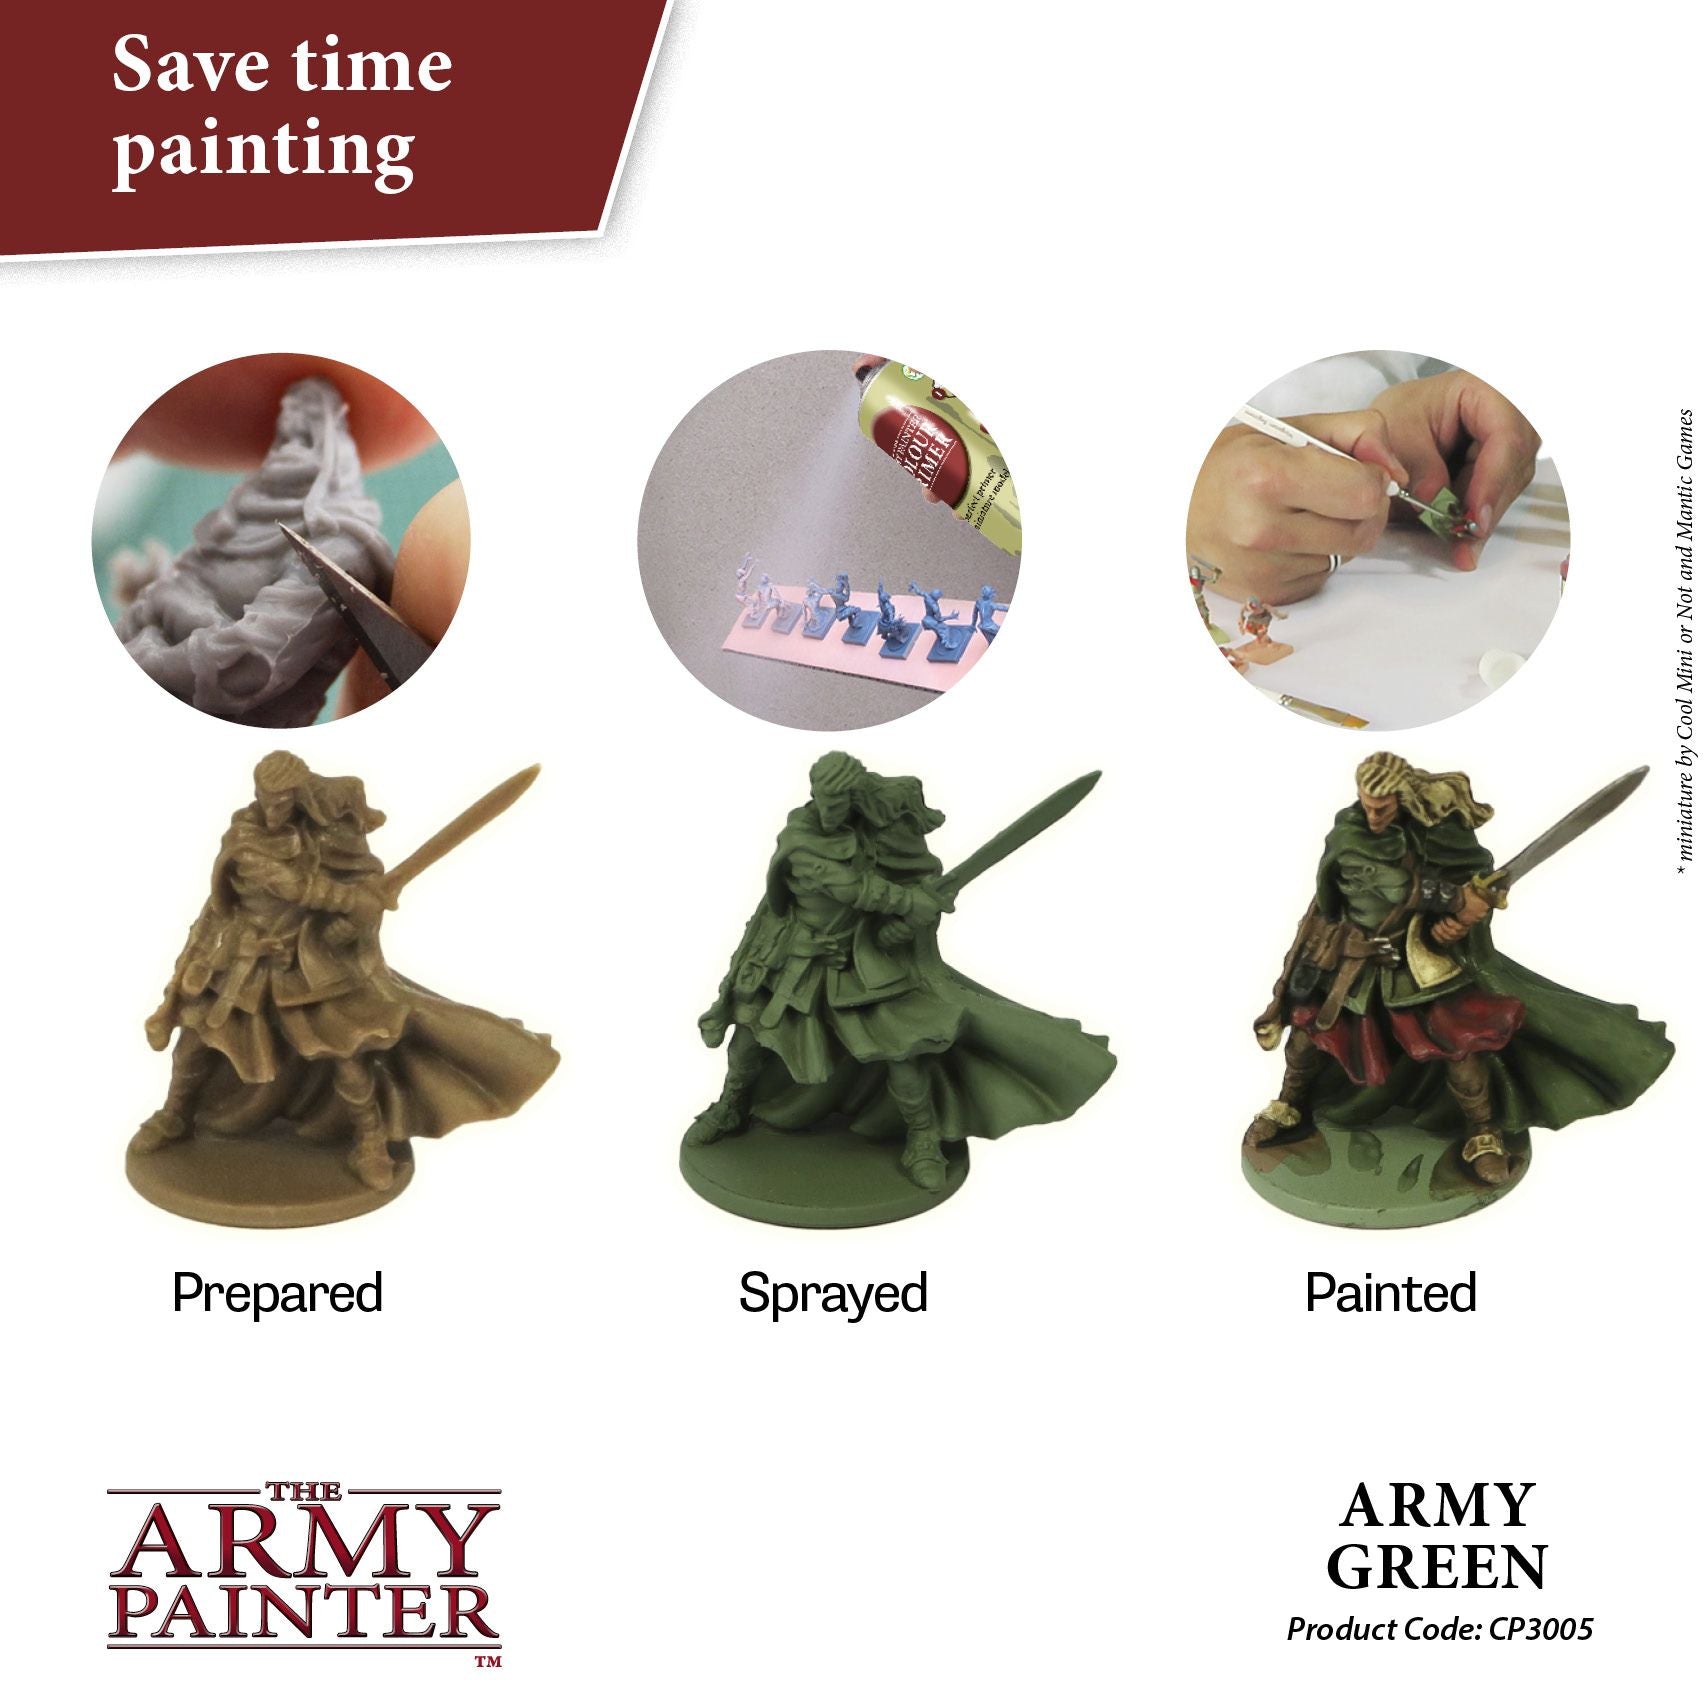 Army Painter Colour Primer - Army Green (400ml) - Loaded Dice